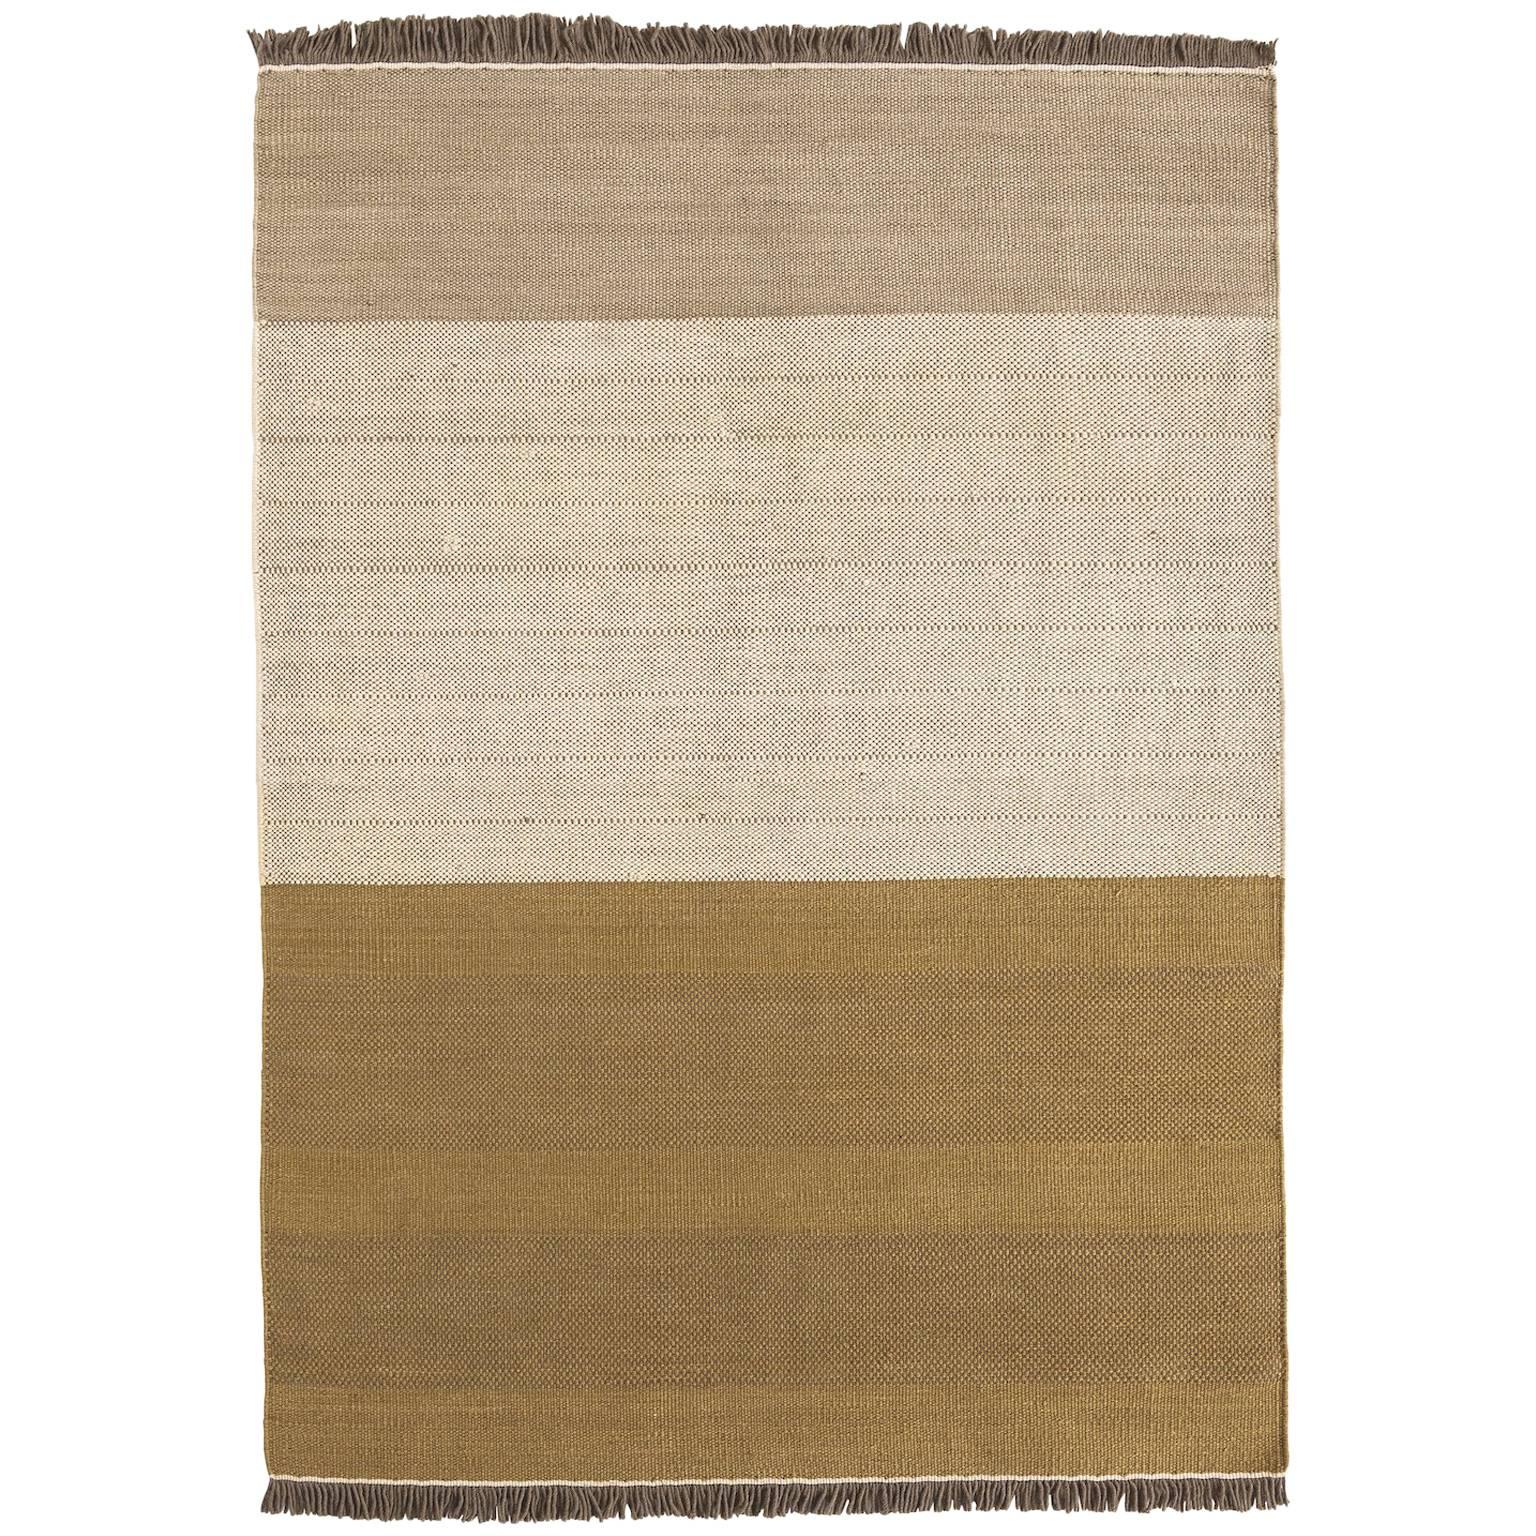 Hand-Loomed Tres Stripes Rug in Ochre by Nani Marquina & Elisa Padro, Large